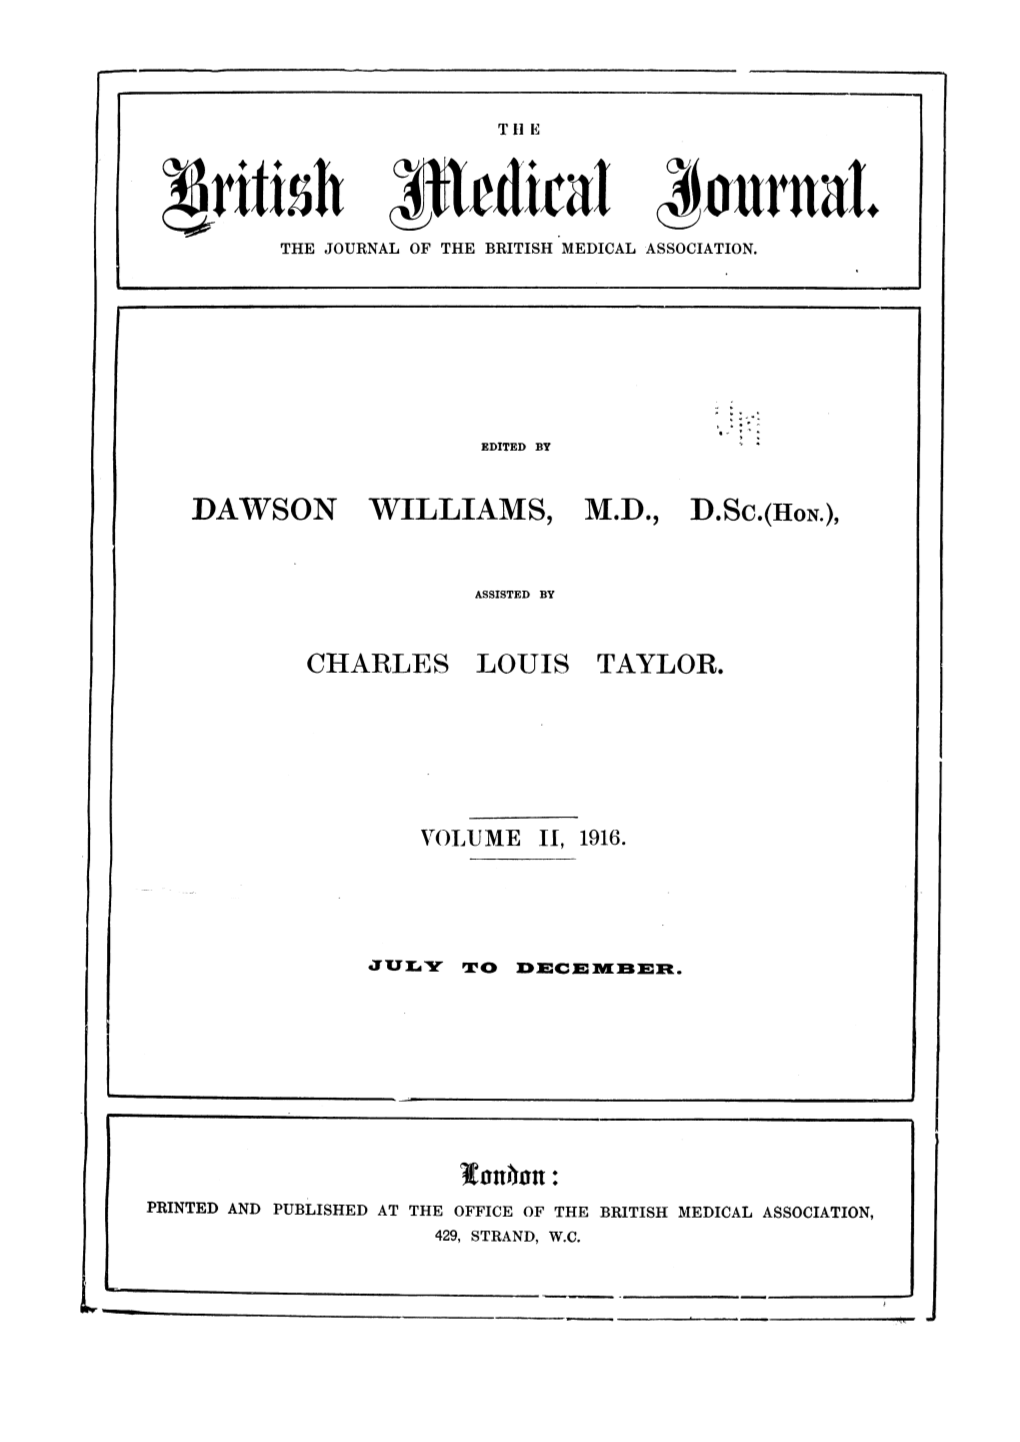 3Ton4hon: PRINTED and PUBLISHED at the OFFICE of the BRITISH MEDICAL ASSOCIATION, 429, STRAND, W.C